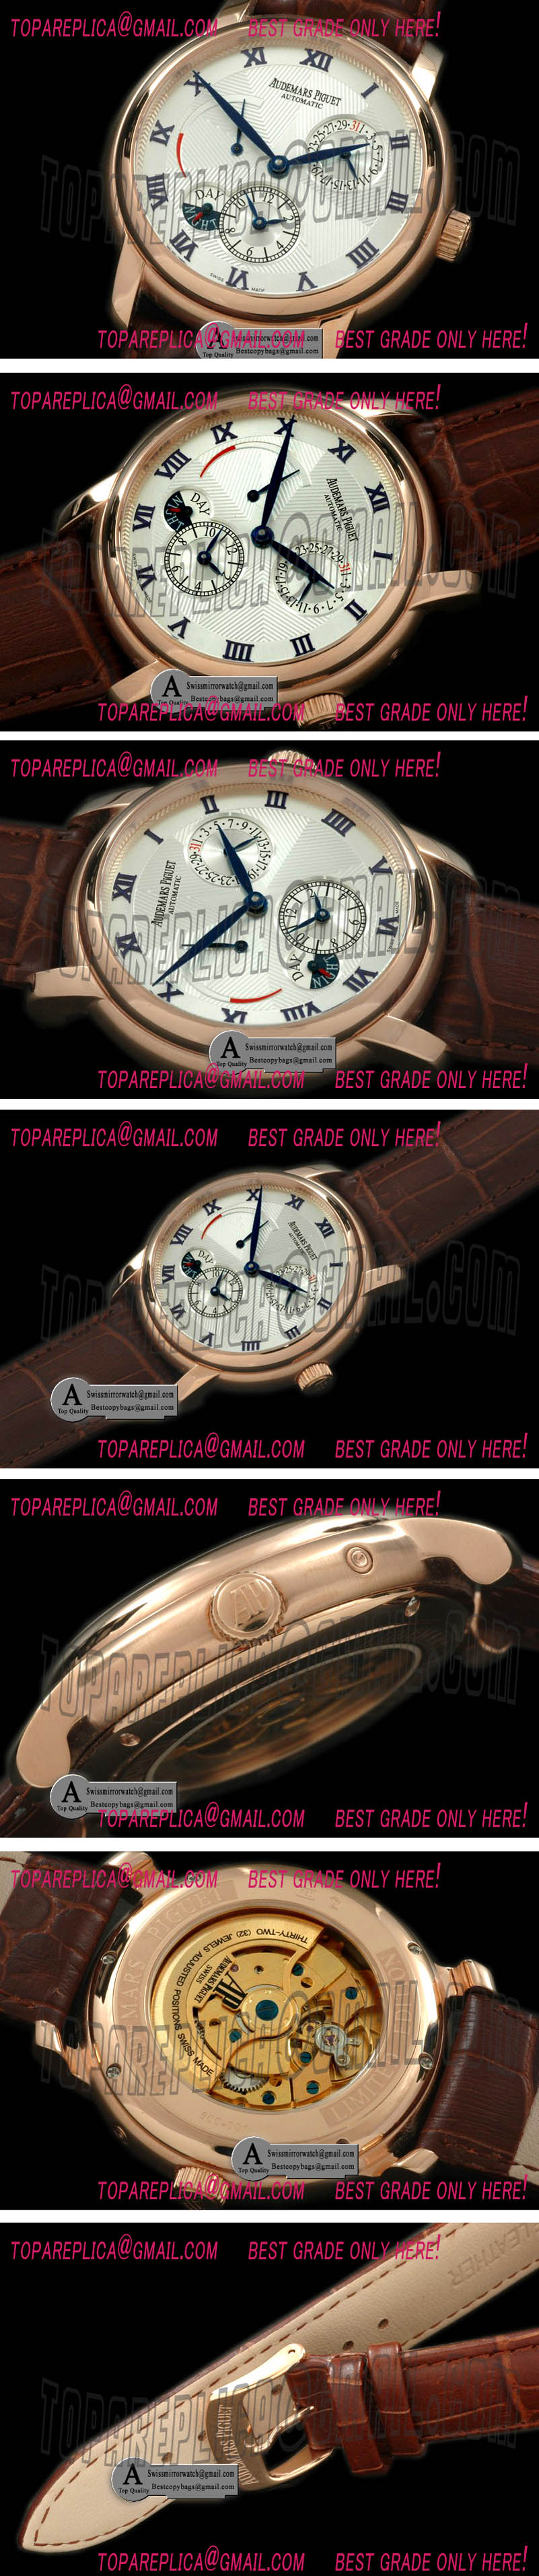 Audemars Piguet Jules Audemars Reserve/Duo Time Rose Gold/Leather White Asian 23J Replica Watches